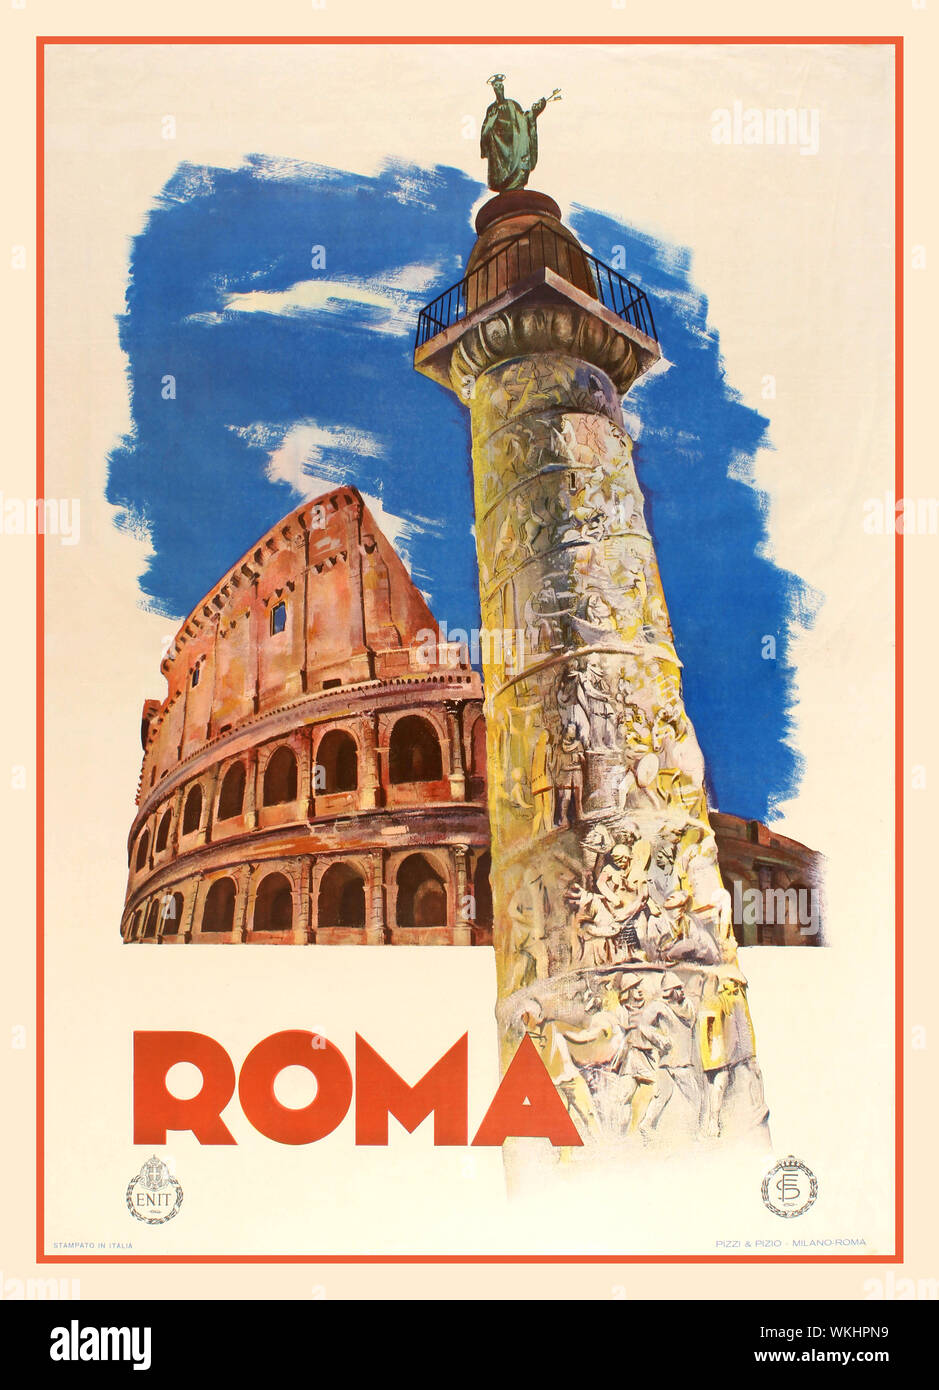 ROME 1930s Vintage travel vacation poster for Rome / Roma issued by ENIT and Italian Railways, of  Roman Coliseum and Column. Italy, 1930s,  ENIT—Agenzia nazionale del turismo, known as The Italian Government Tourist Board, formerly the Ente Nazionale Italiano per il Turismo ('Italian National Agency for Tourism') is the Italian national tourism board. It was founded in 1919 under the Liberal-Radical government of Francesco Saverio Nitti. ENIT is responsible for the promoting worldwide tourism to Italy. Stock Photo